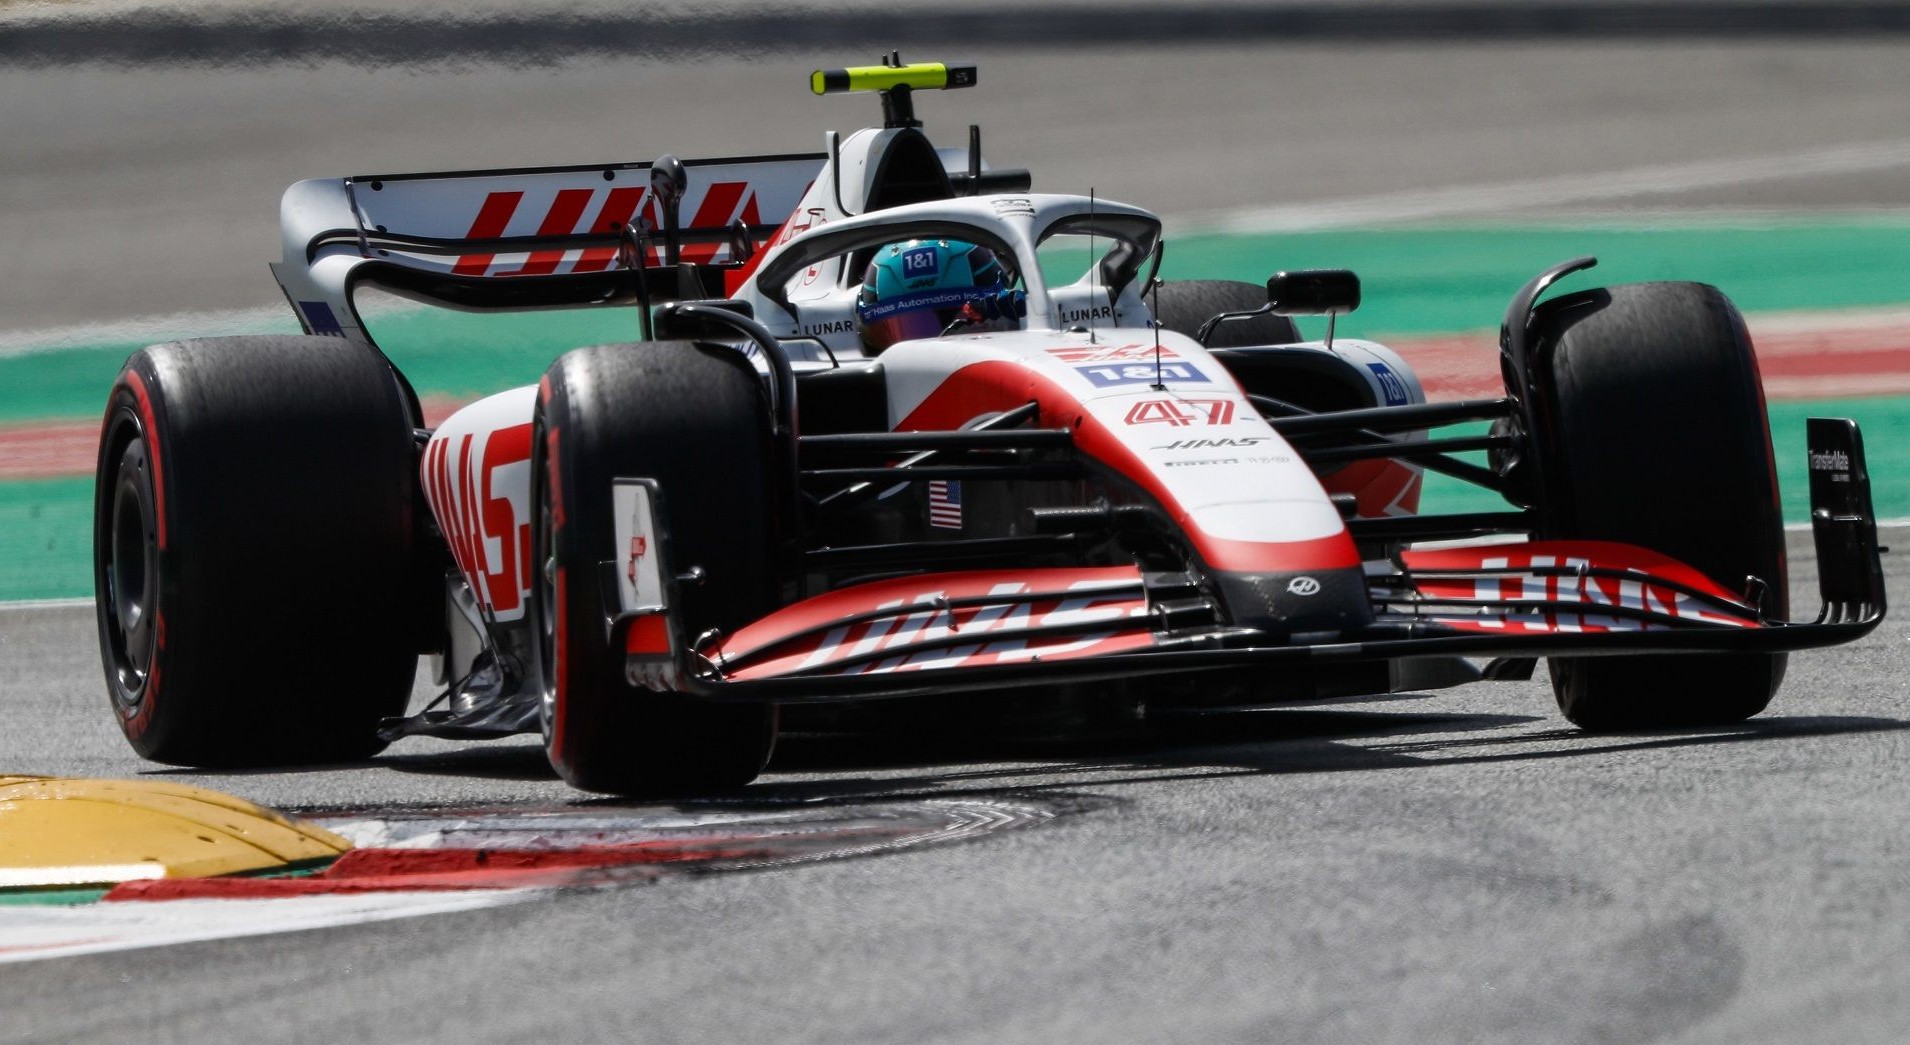 Haas shows a strong performance despite running with no upgrades in Spain